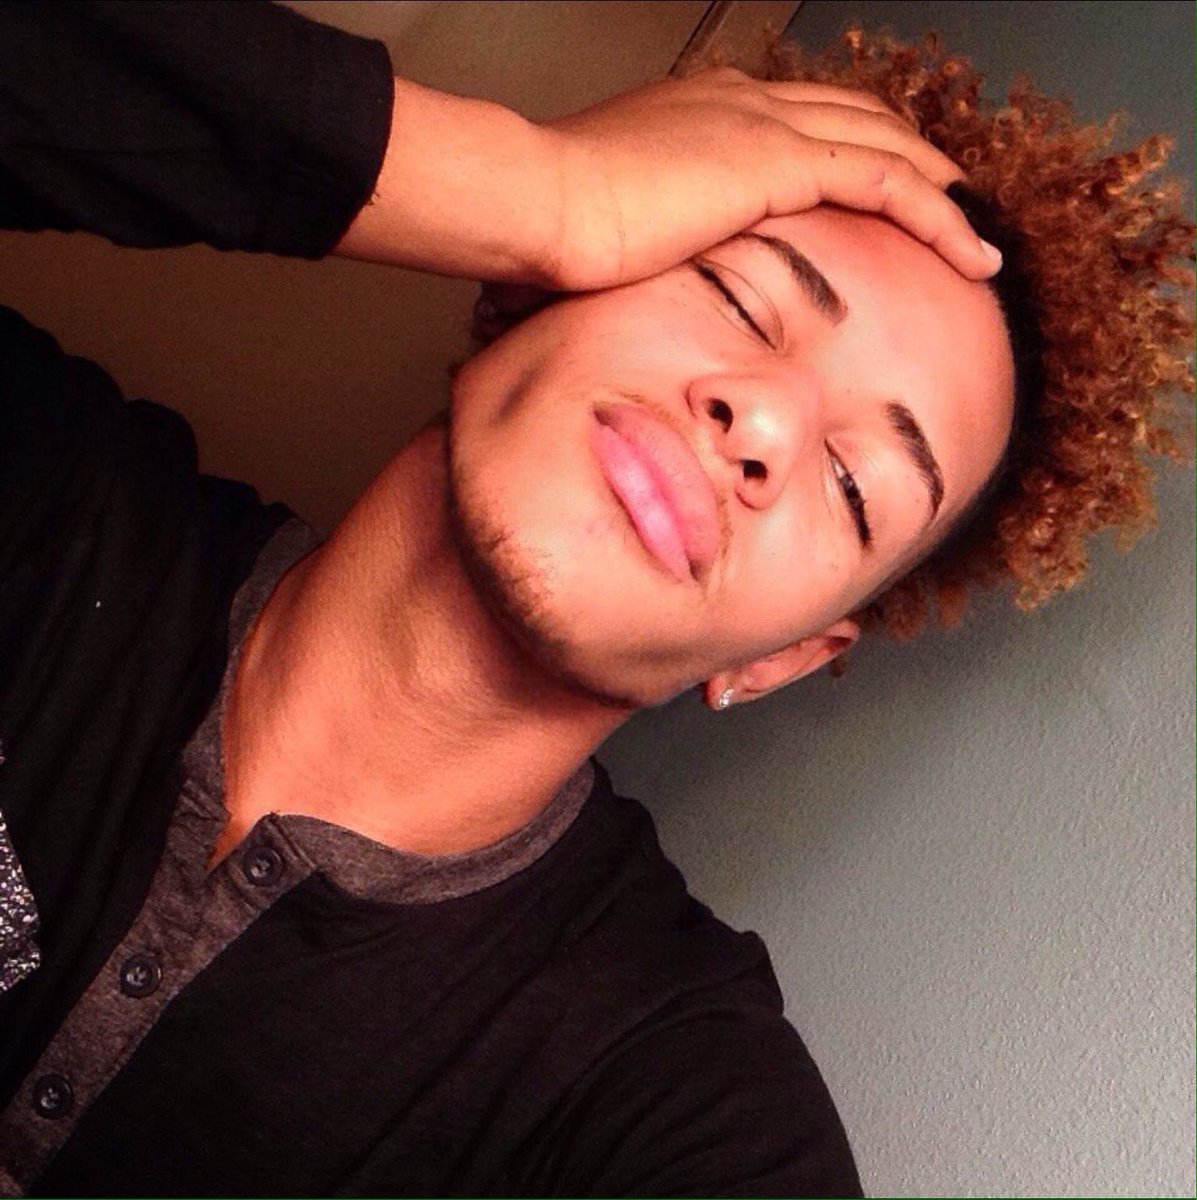 Mixed Boys Daily On Twitter Ill Leave This Here